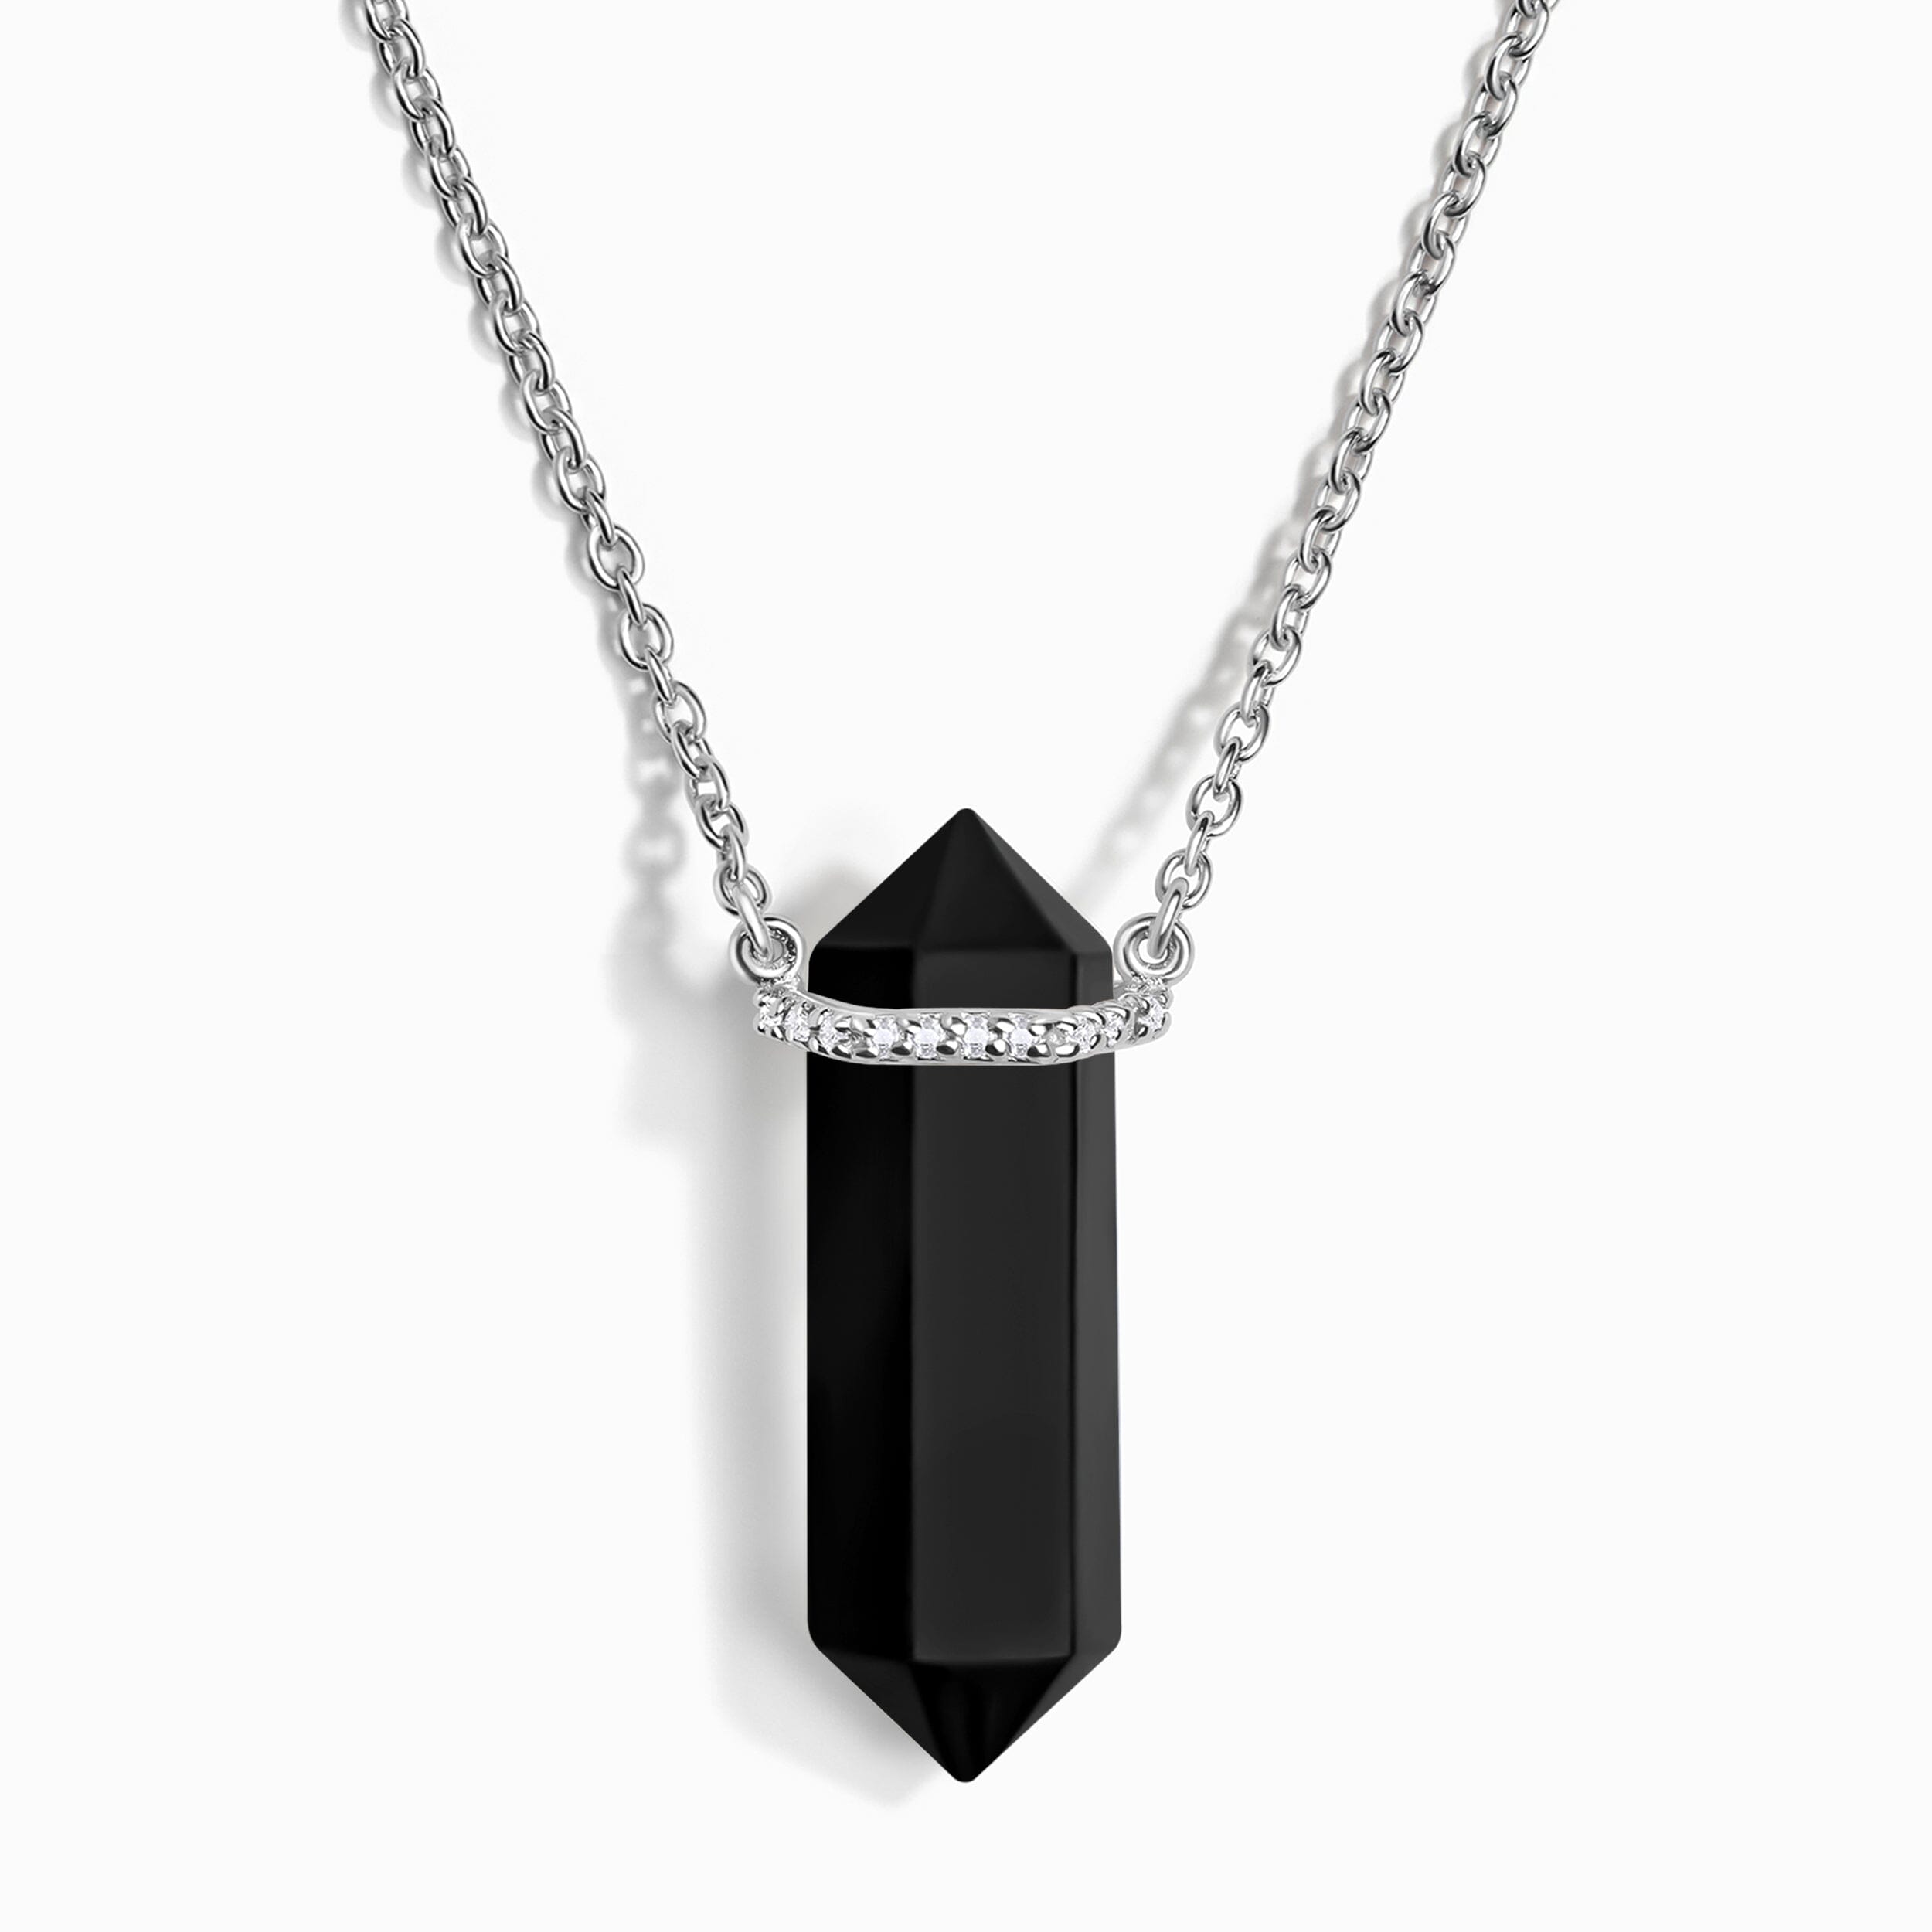 Simply the Best Black Choker Necklace